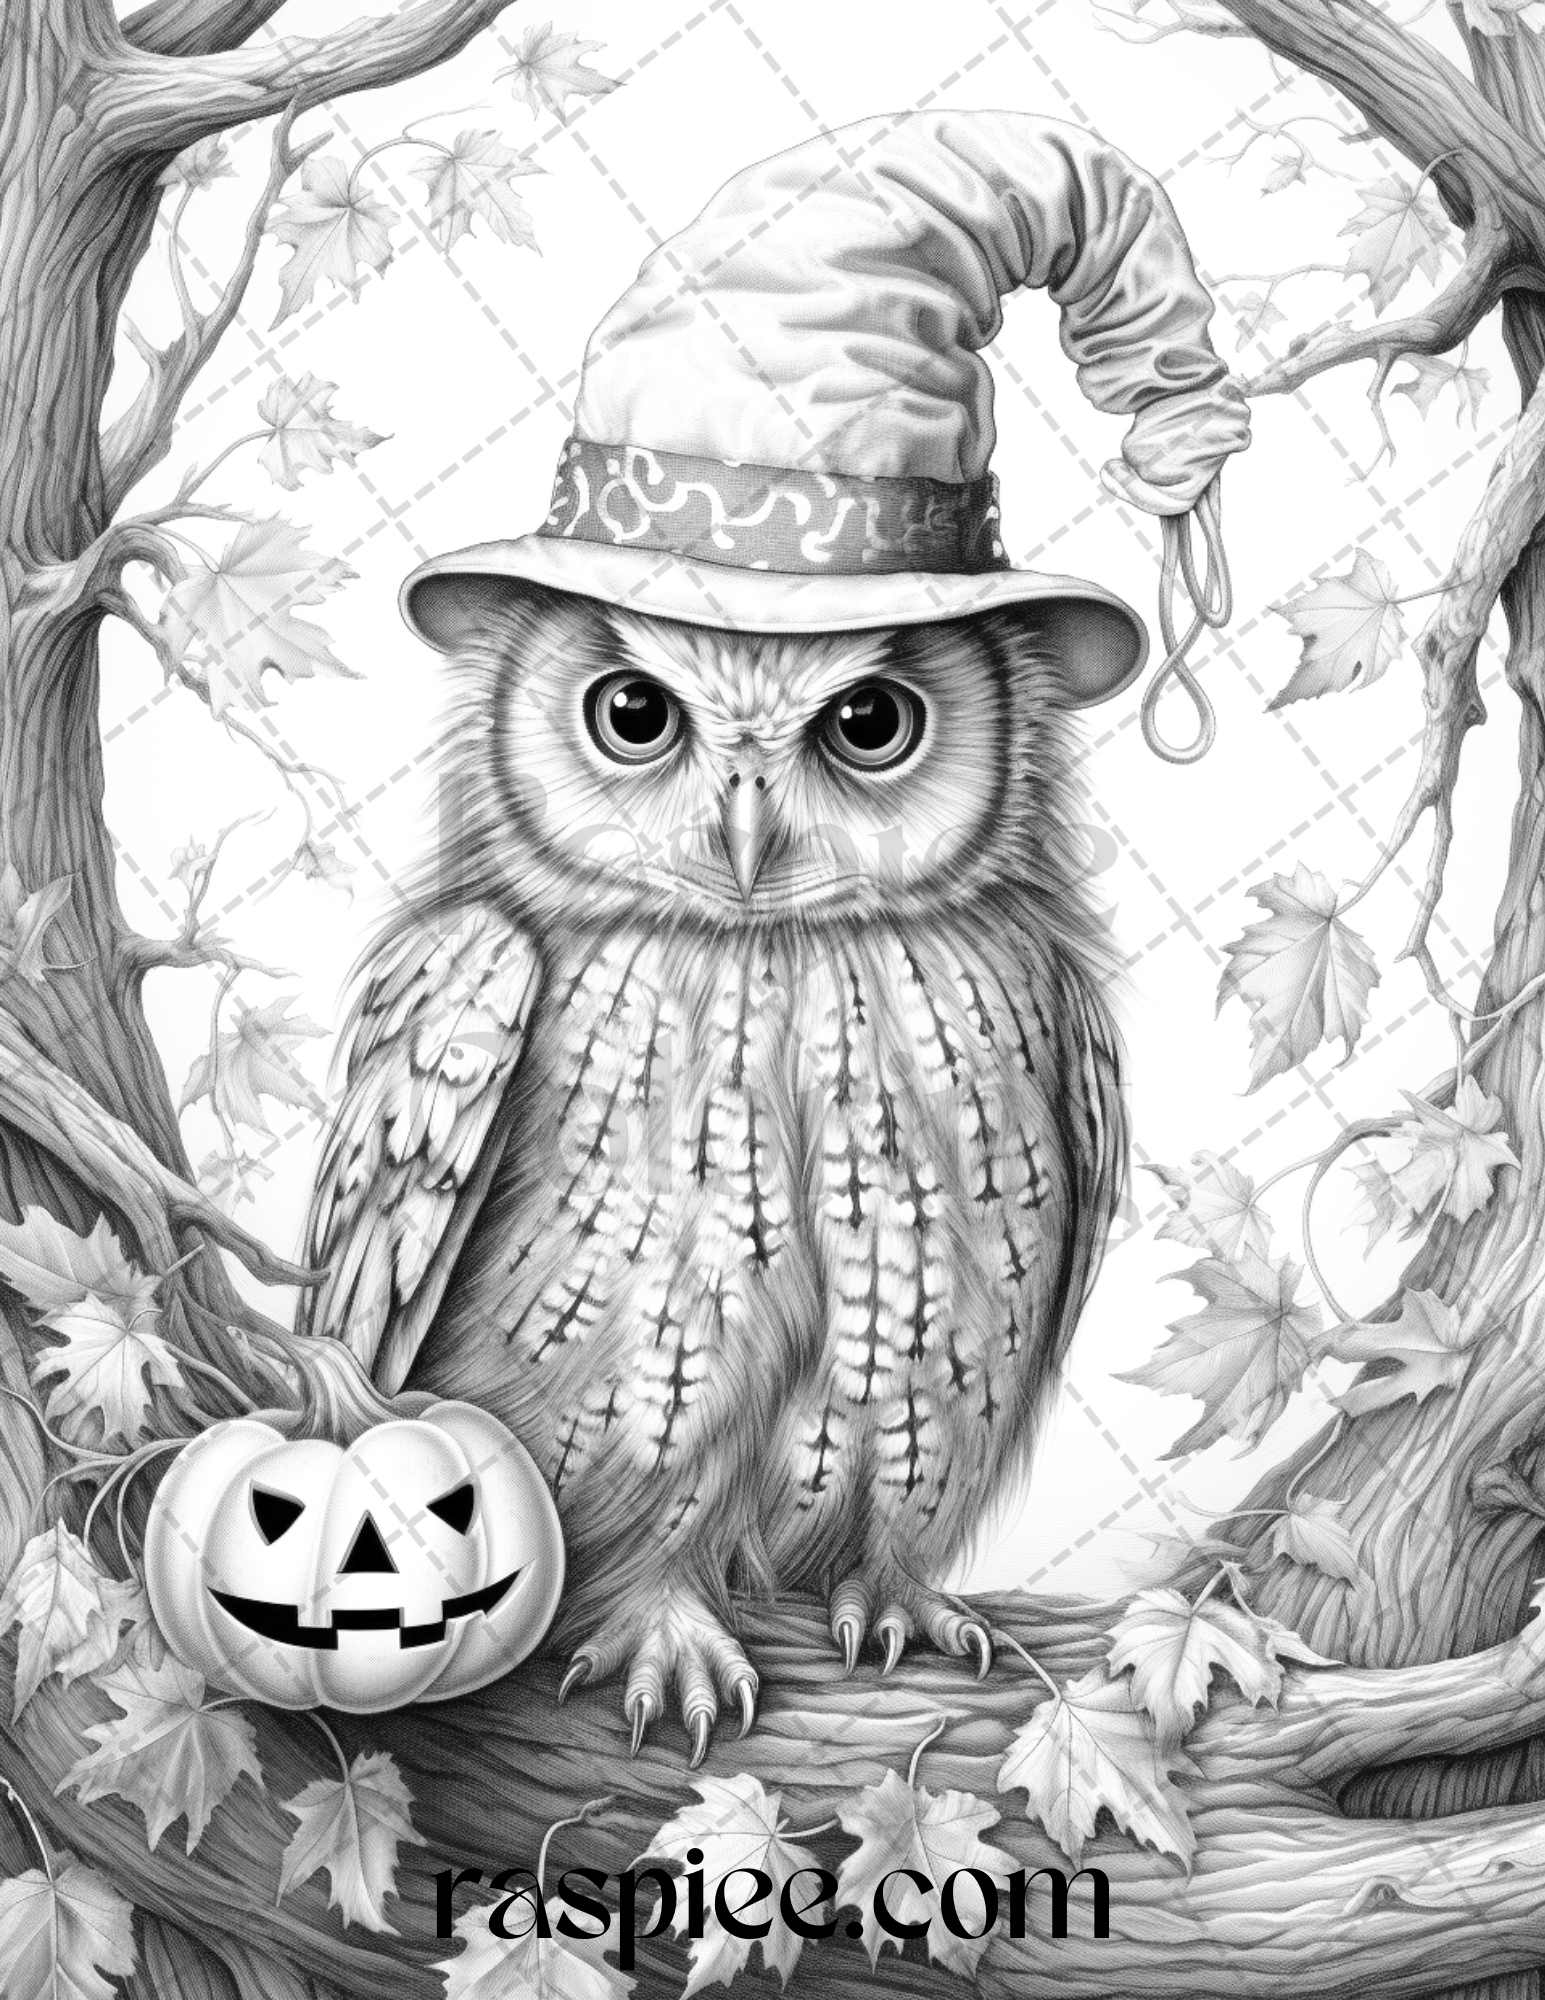 Halloween Witch Owl Grayscale Coloring Pages, Printable Coloring Sheets for Adults and Kids, Instant Download Halloween Coloring Book, Witchcraft Theme Spooky Owl Coloring